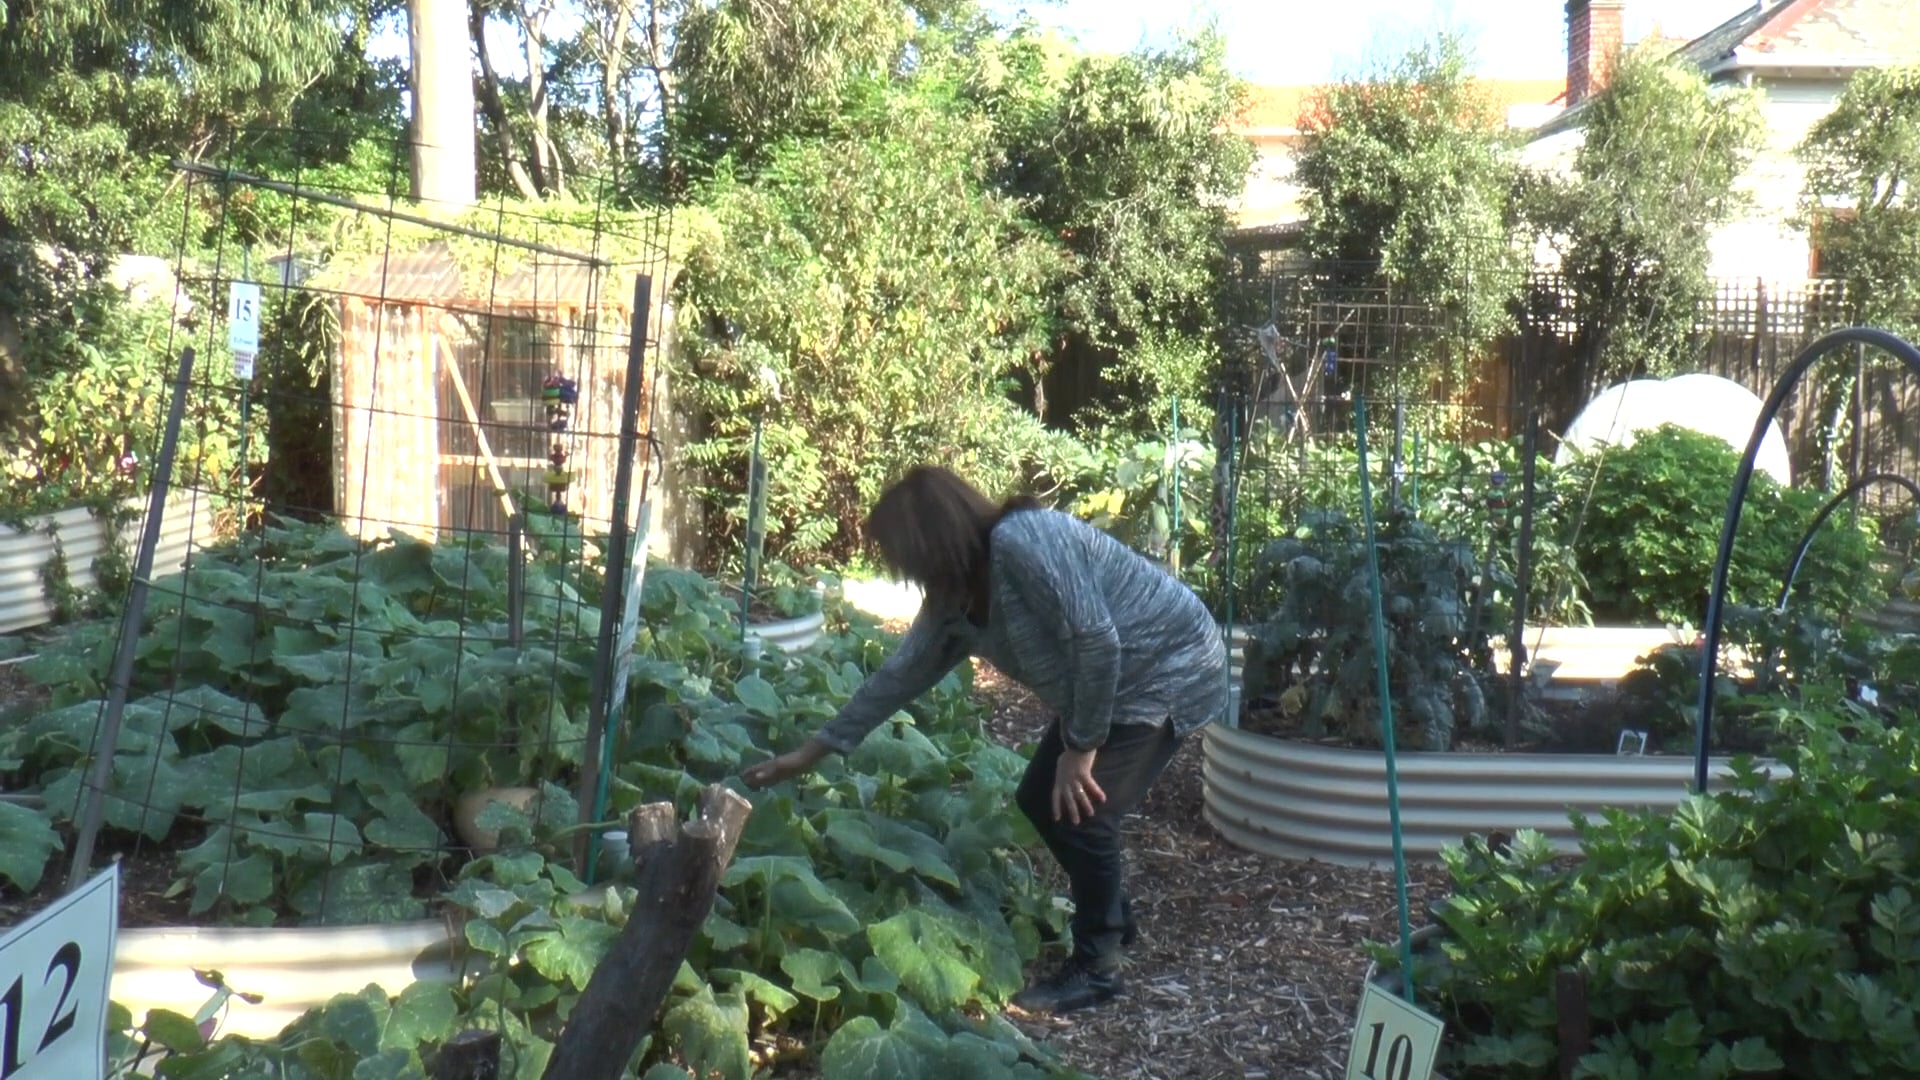 screen shot from video of a lady bending down in a garden